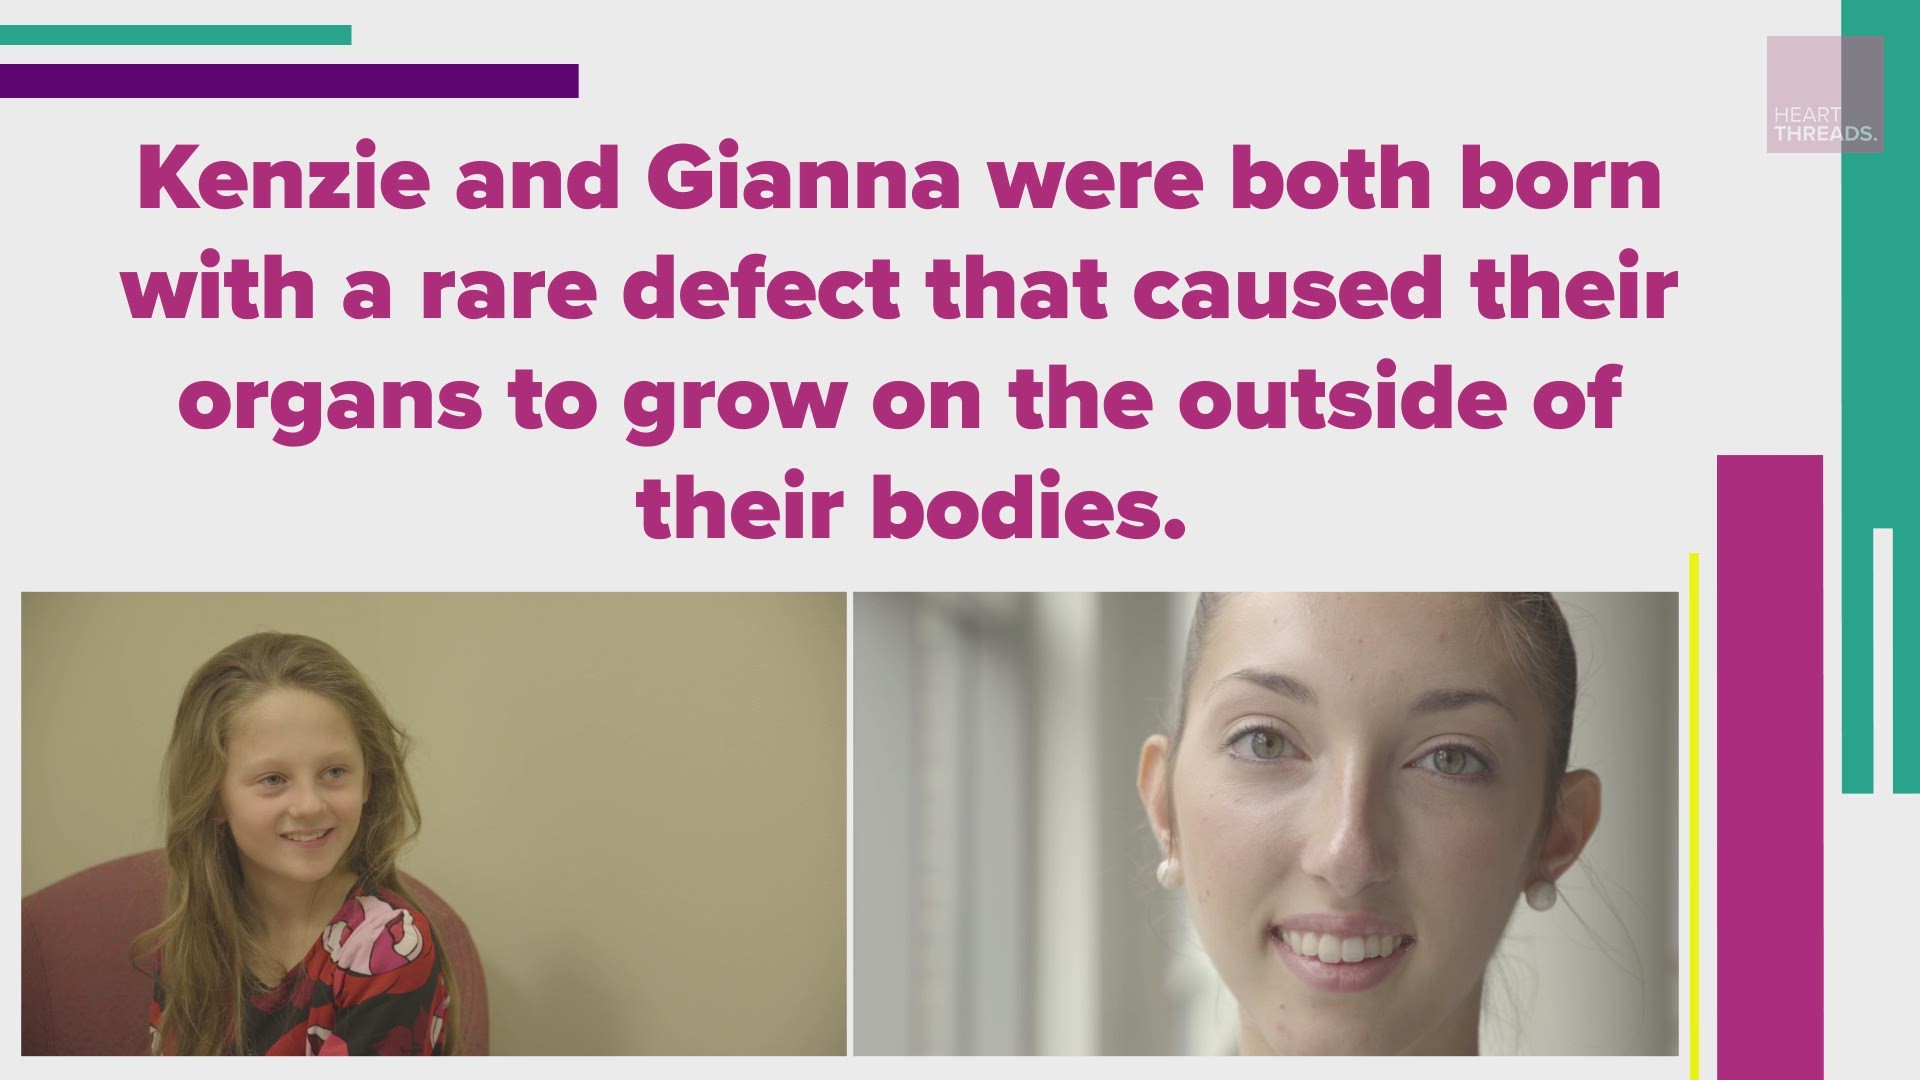 When nine-year-old Kenzie caught wind of Gianna’s story, she knew she had to meet the powerful dancer who shared the same rare birth defect.